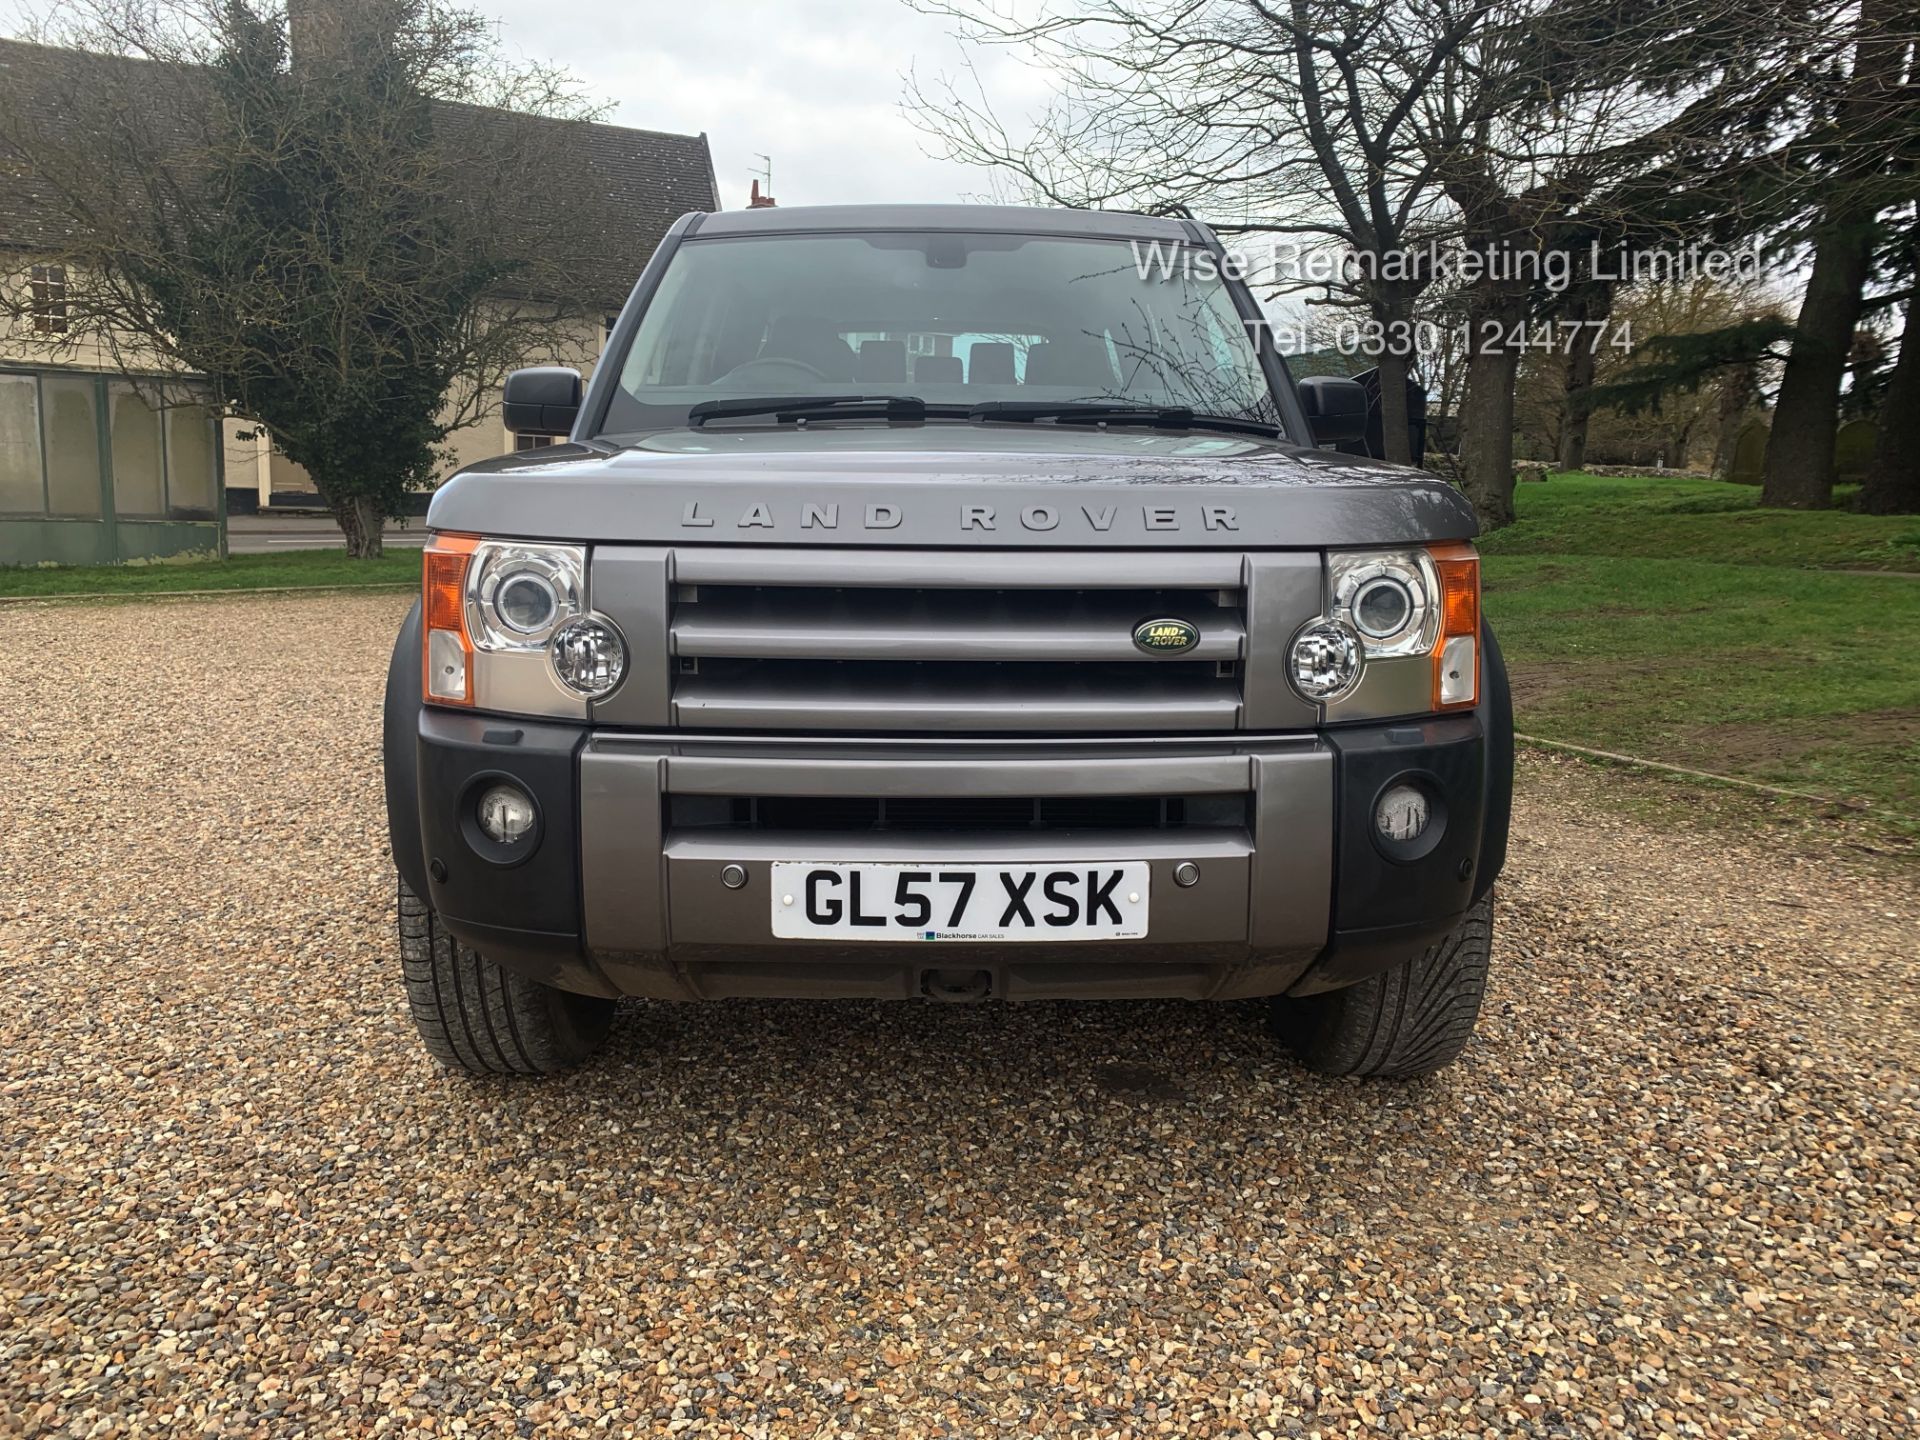 Land Rover Discovery 2.7 TDV6 HSE - Automatic - 2008 Reg - Full Leather - 7 Seater - Sat Nav - - Image 2 of 31